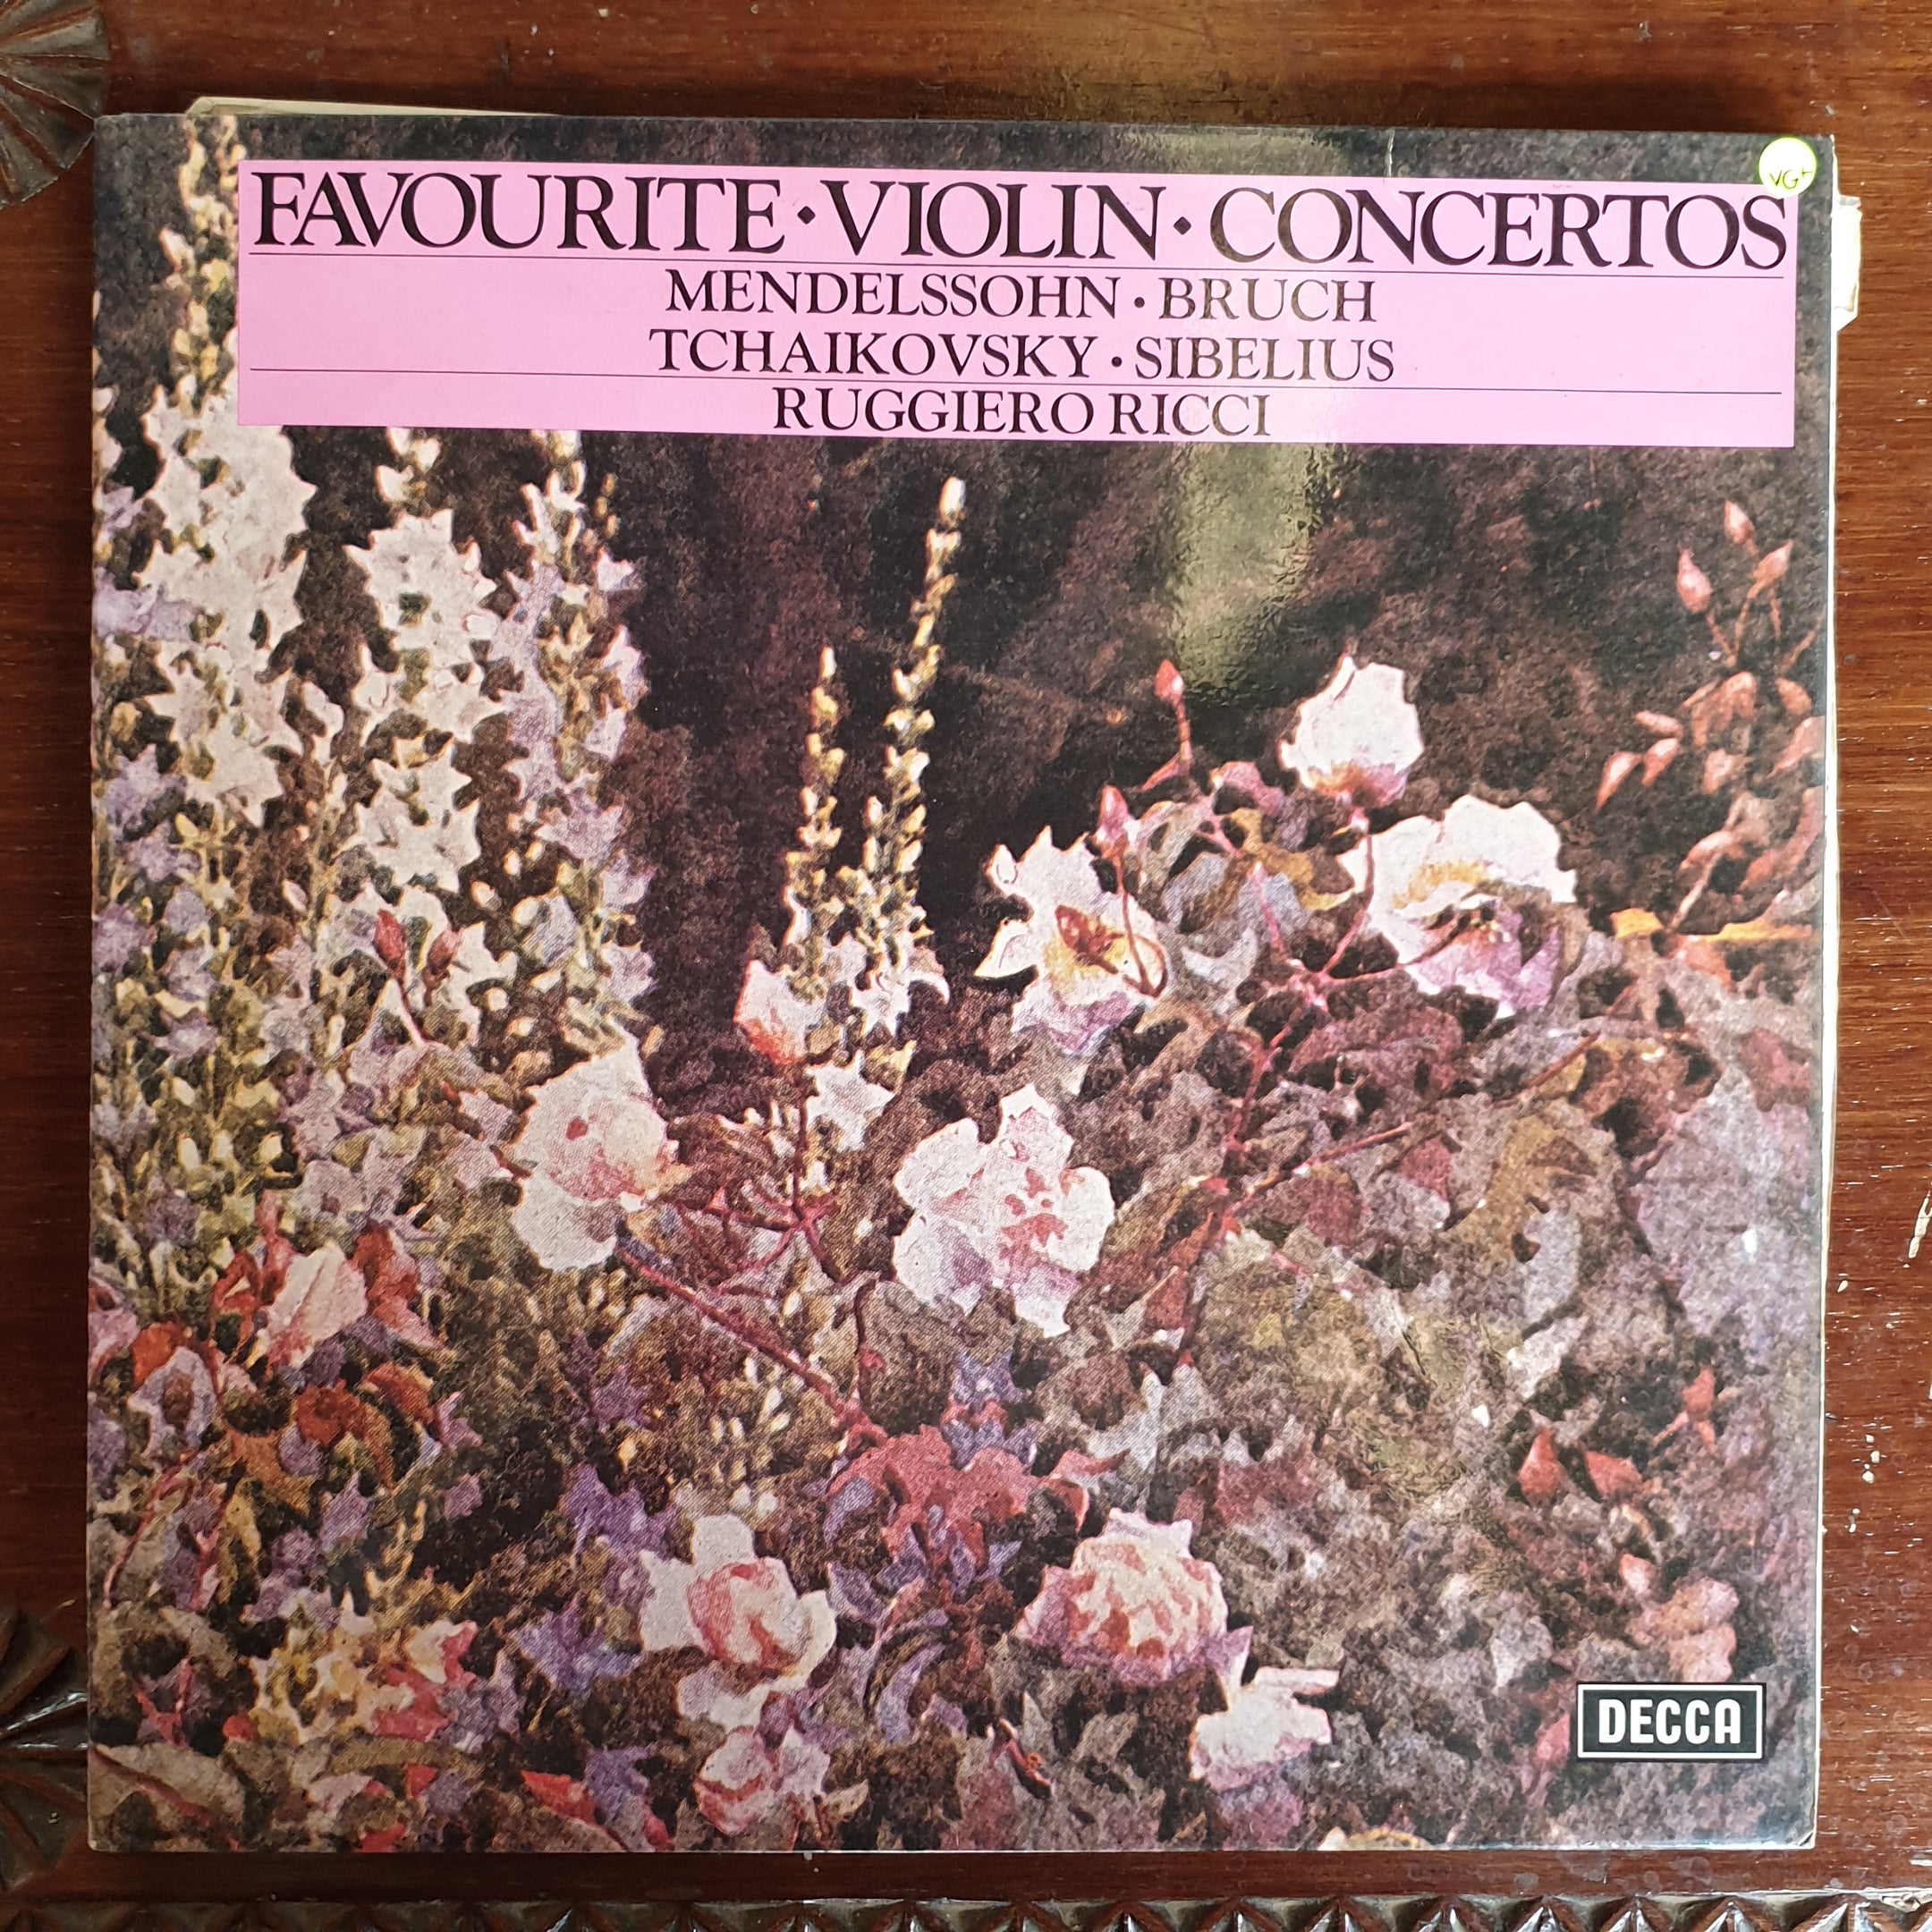 Other Tapes, LPs  Other Formats Favourite Violin Concertos Mendelssohn  Bruch Tchaikovsky/ Sibelius, Ruggiero Ricci D... for sale in  Johannesburg (ID:594077118)